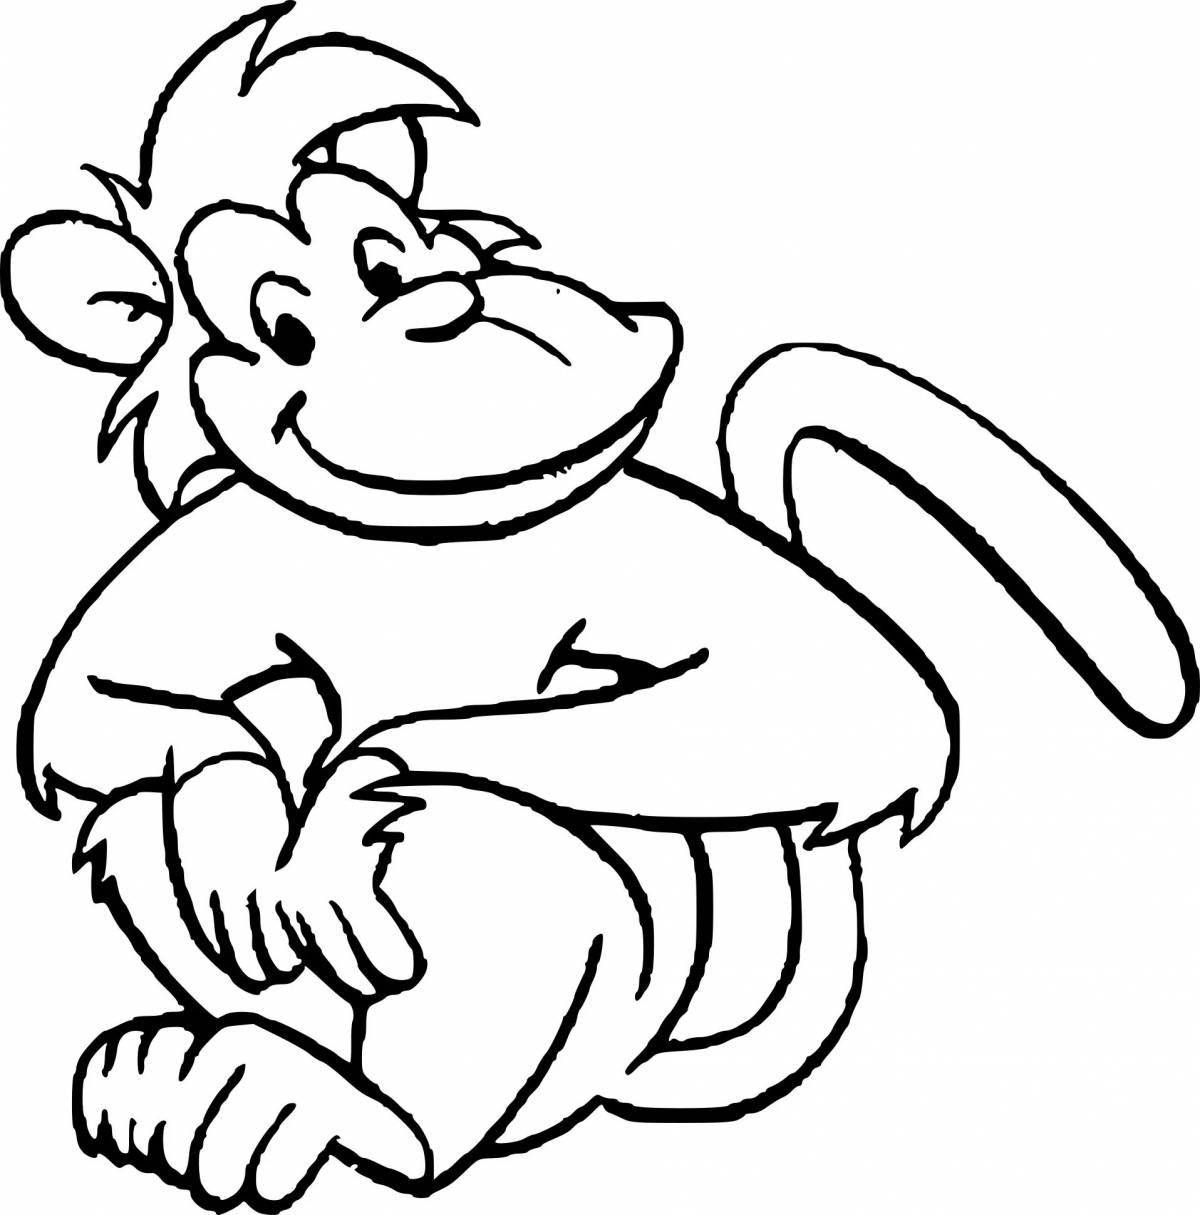 Amusing monkey figurine coloring page